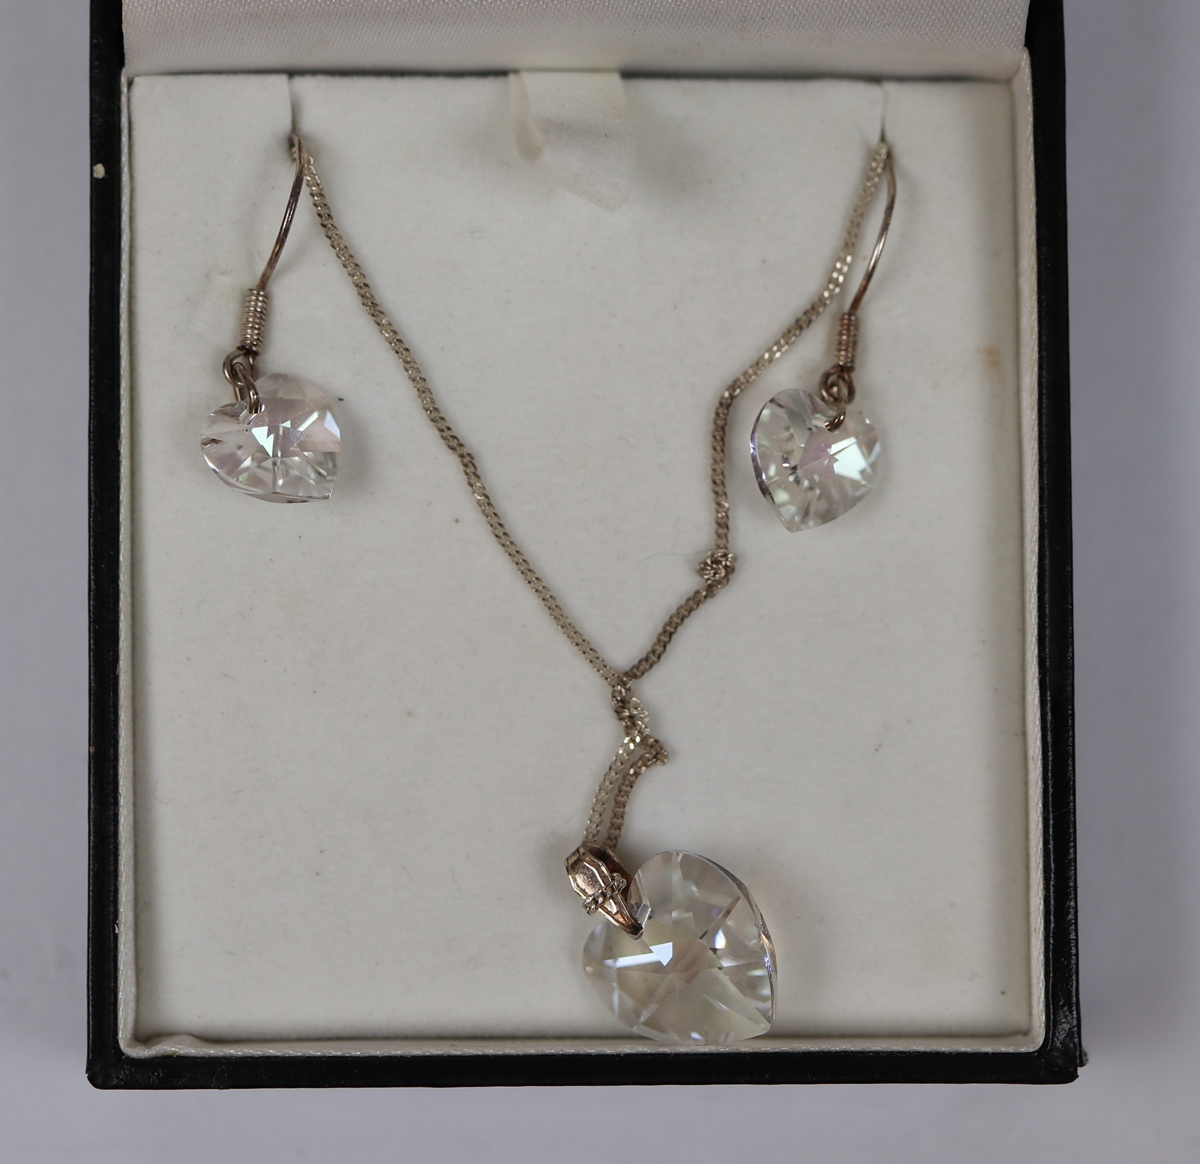 Silver Swarovski crystal necklace & earrings set together with 3 pairs of silver earrings - Image 3 of 3